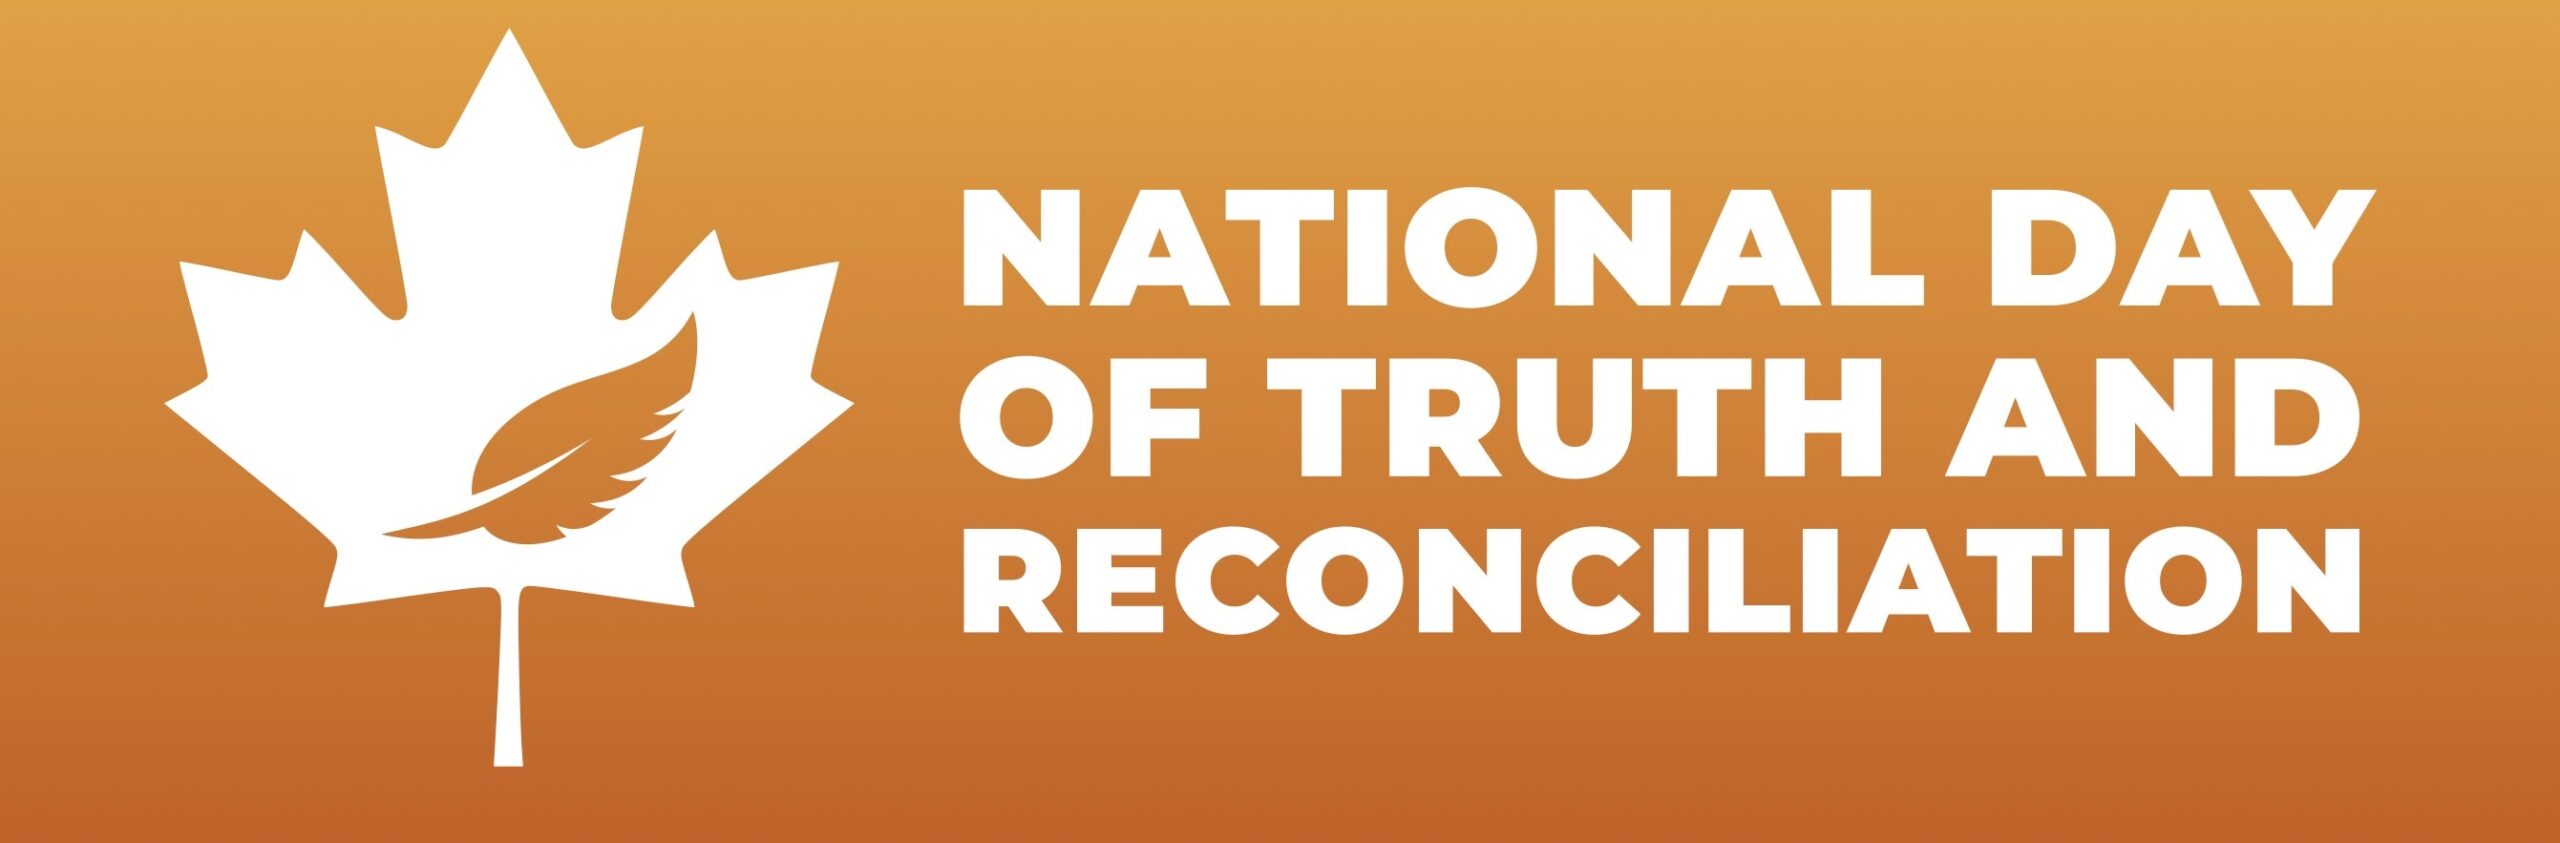 truth and reconciliation day essay